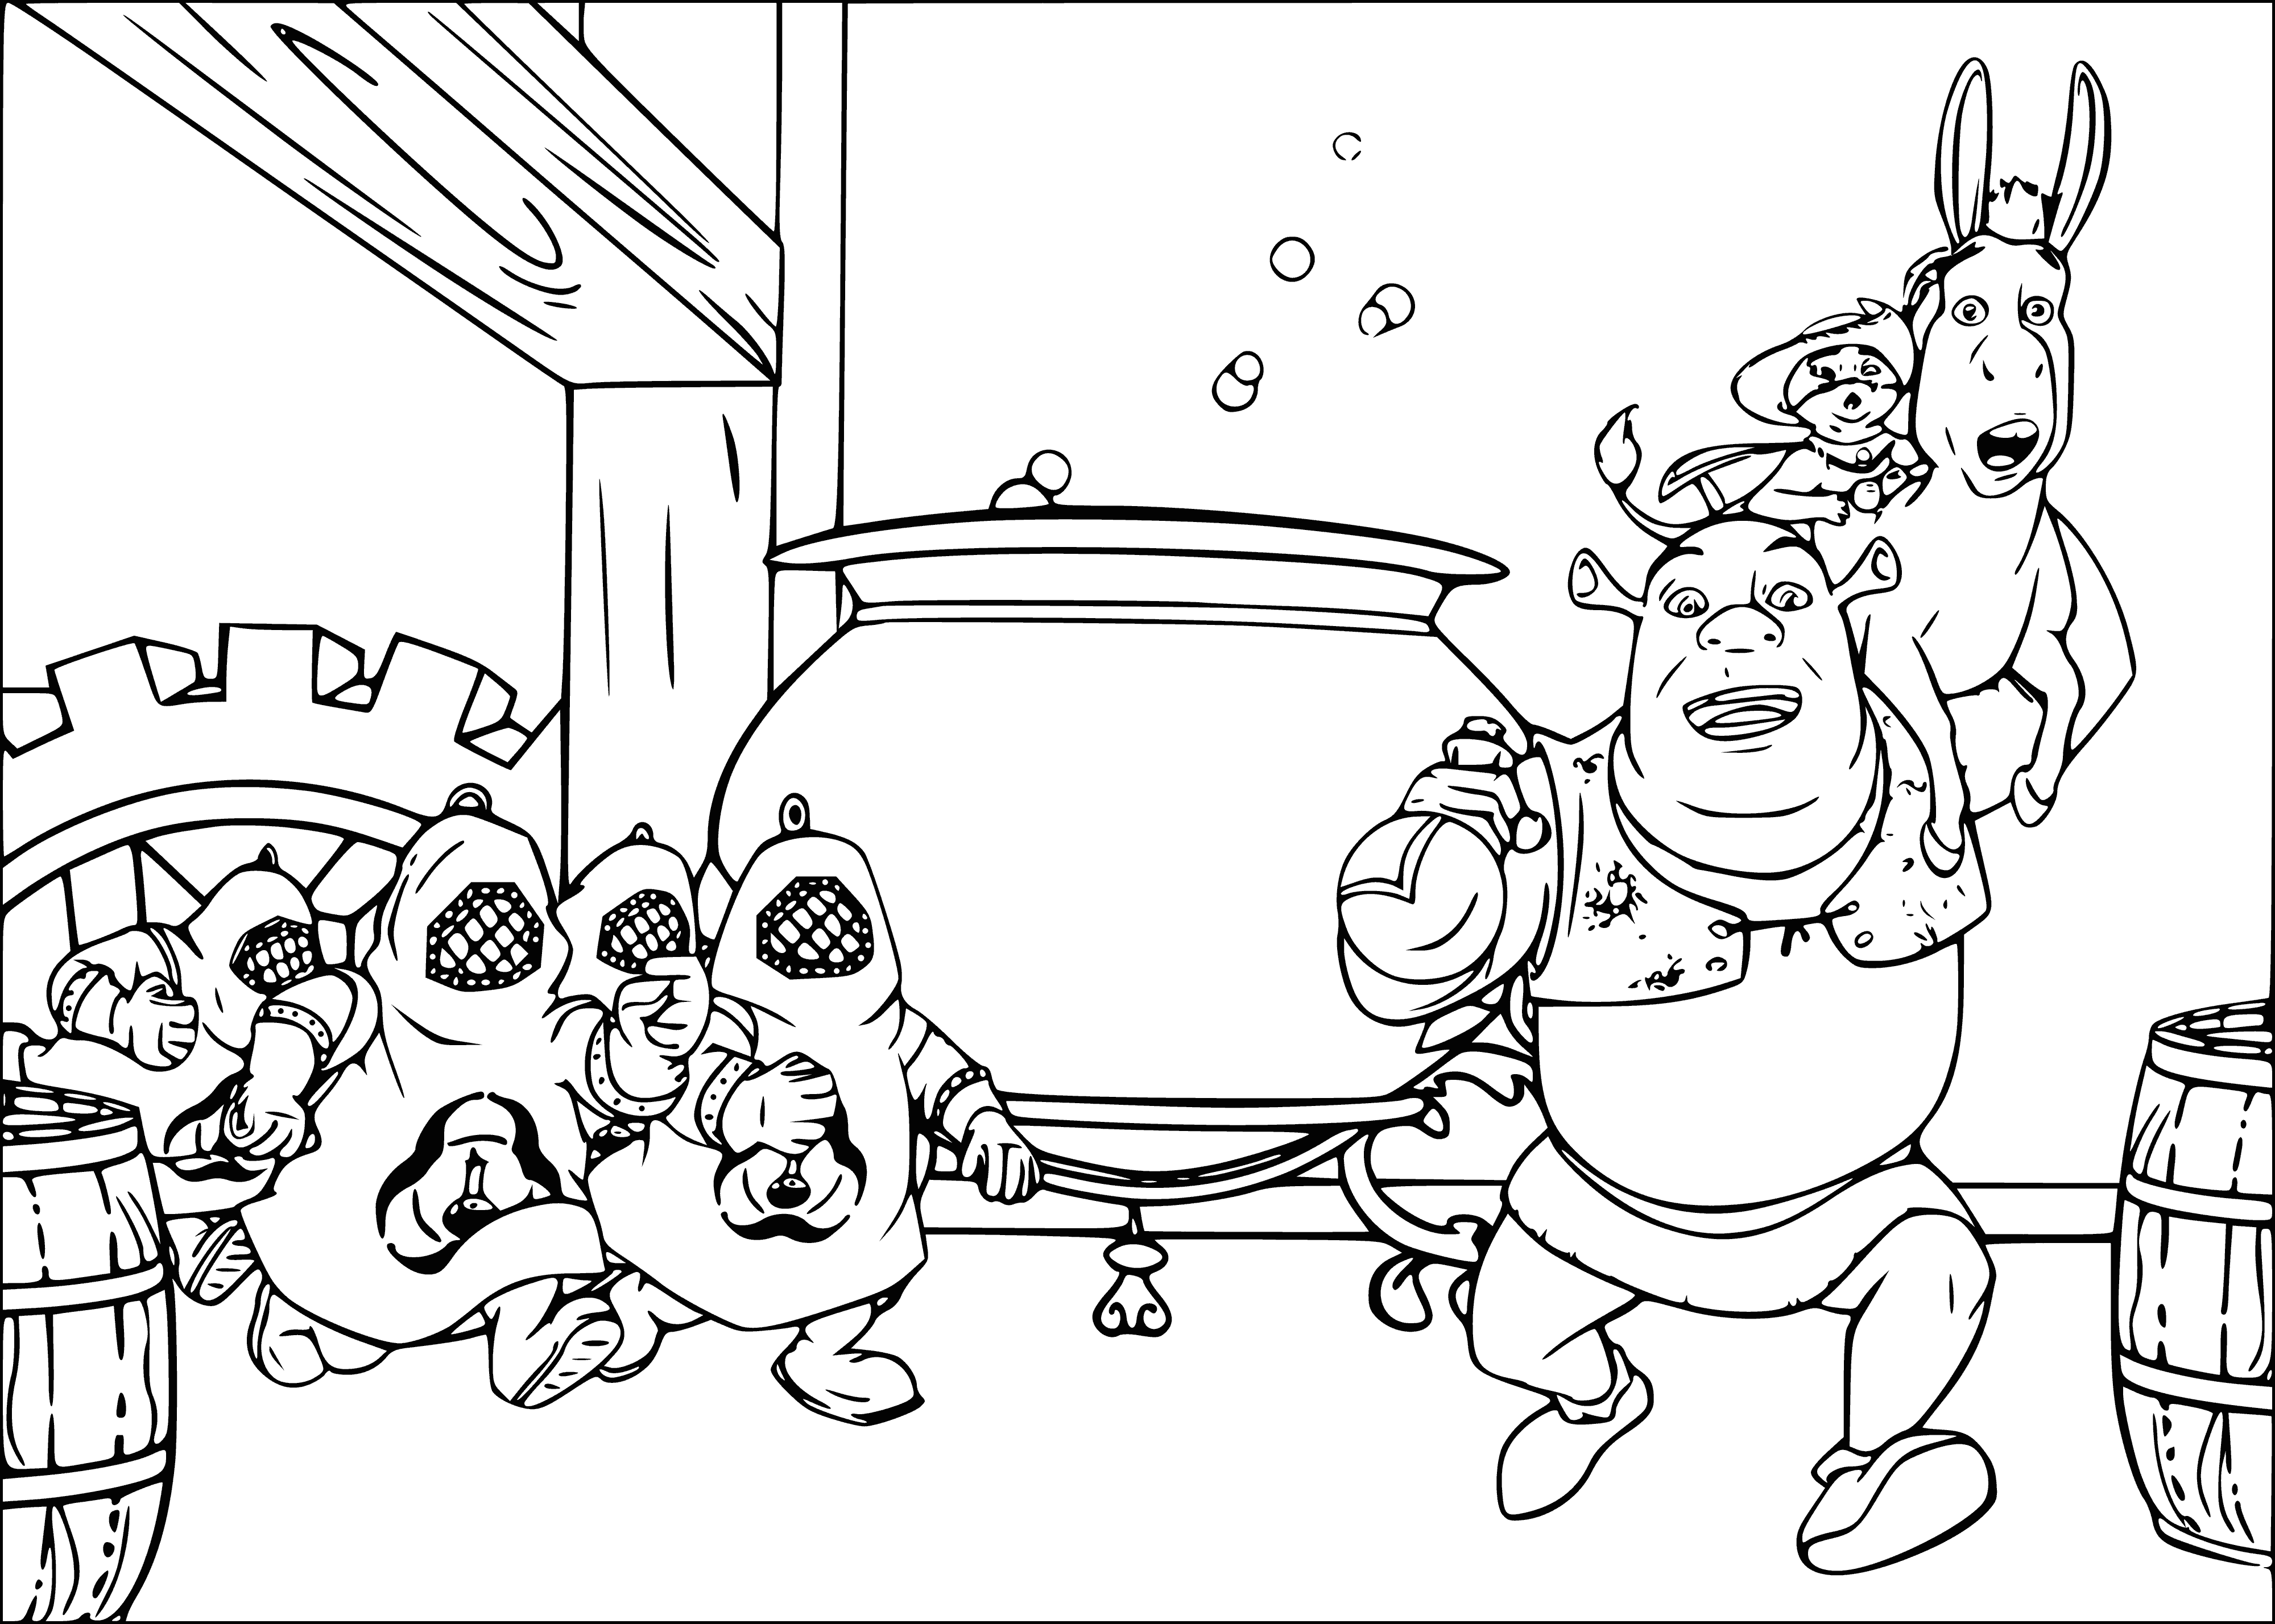 Escape from the factory coloring page